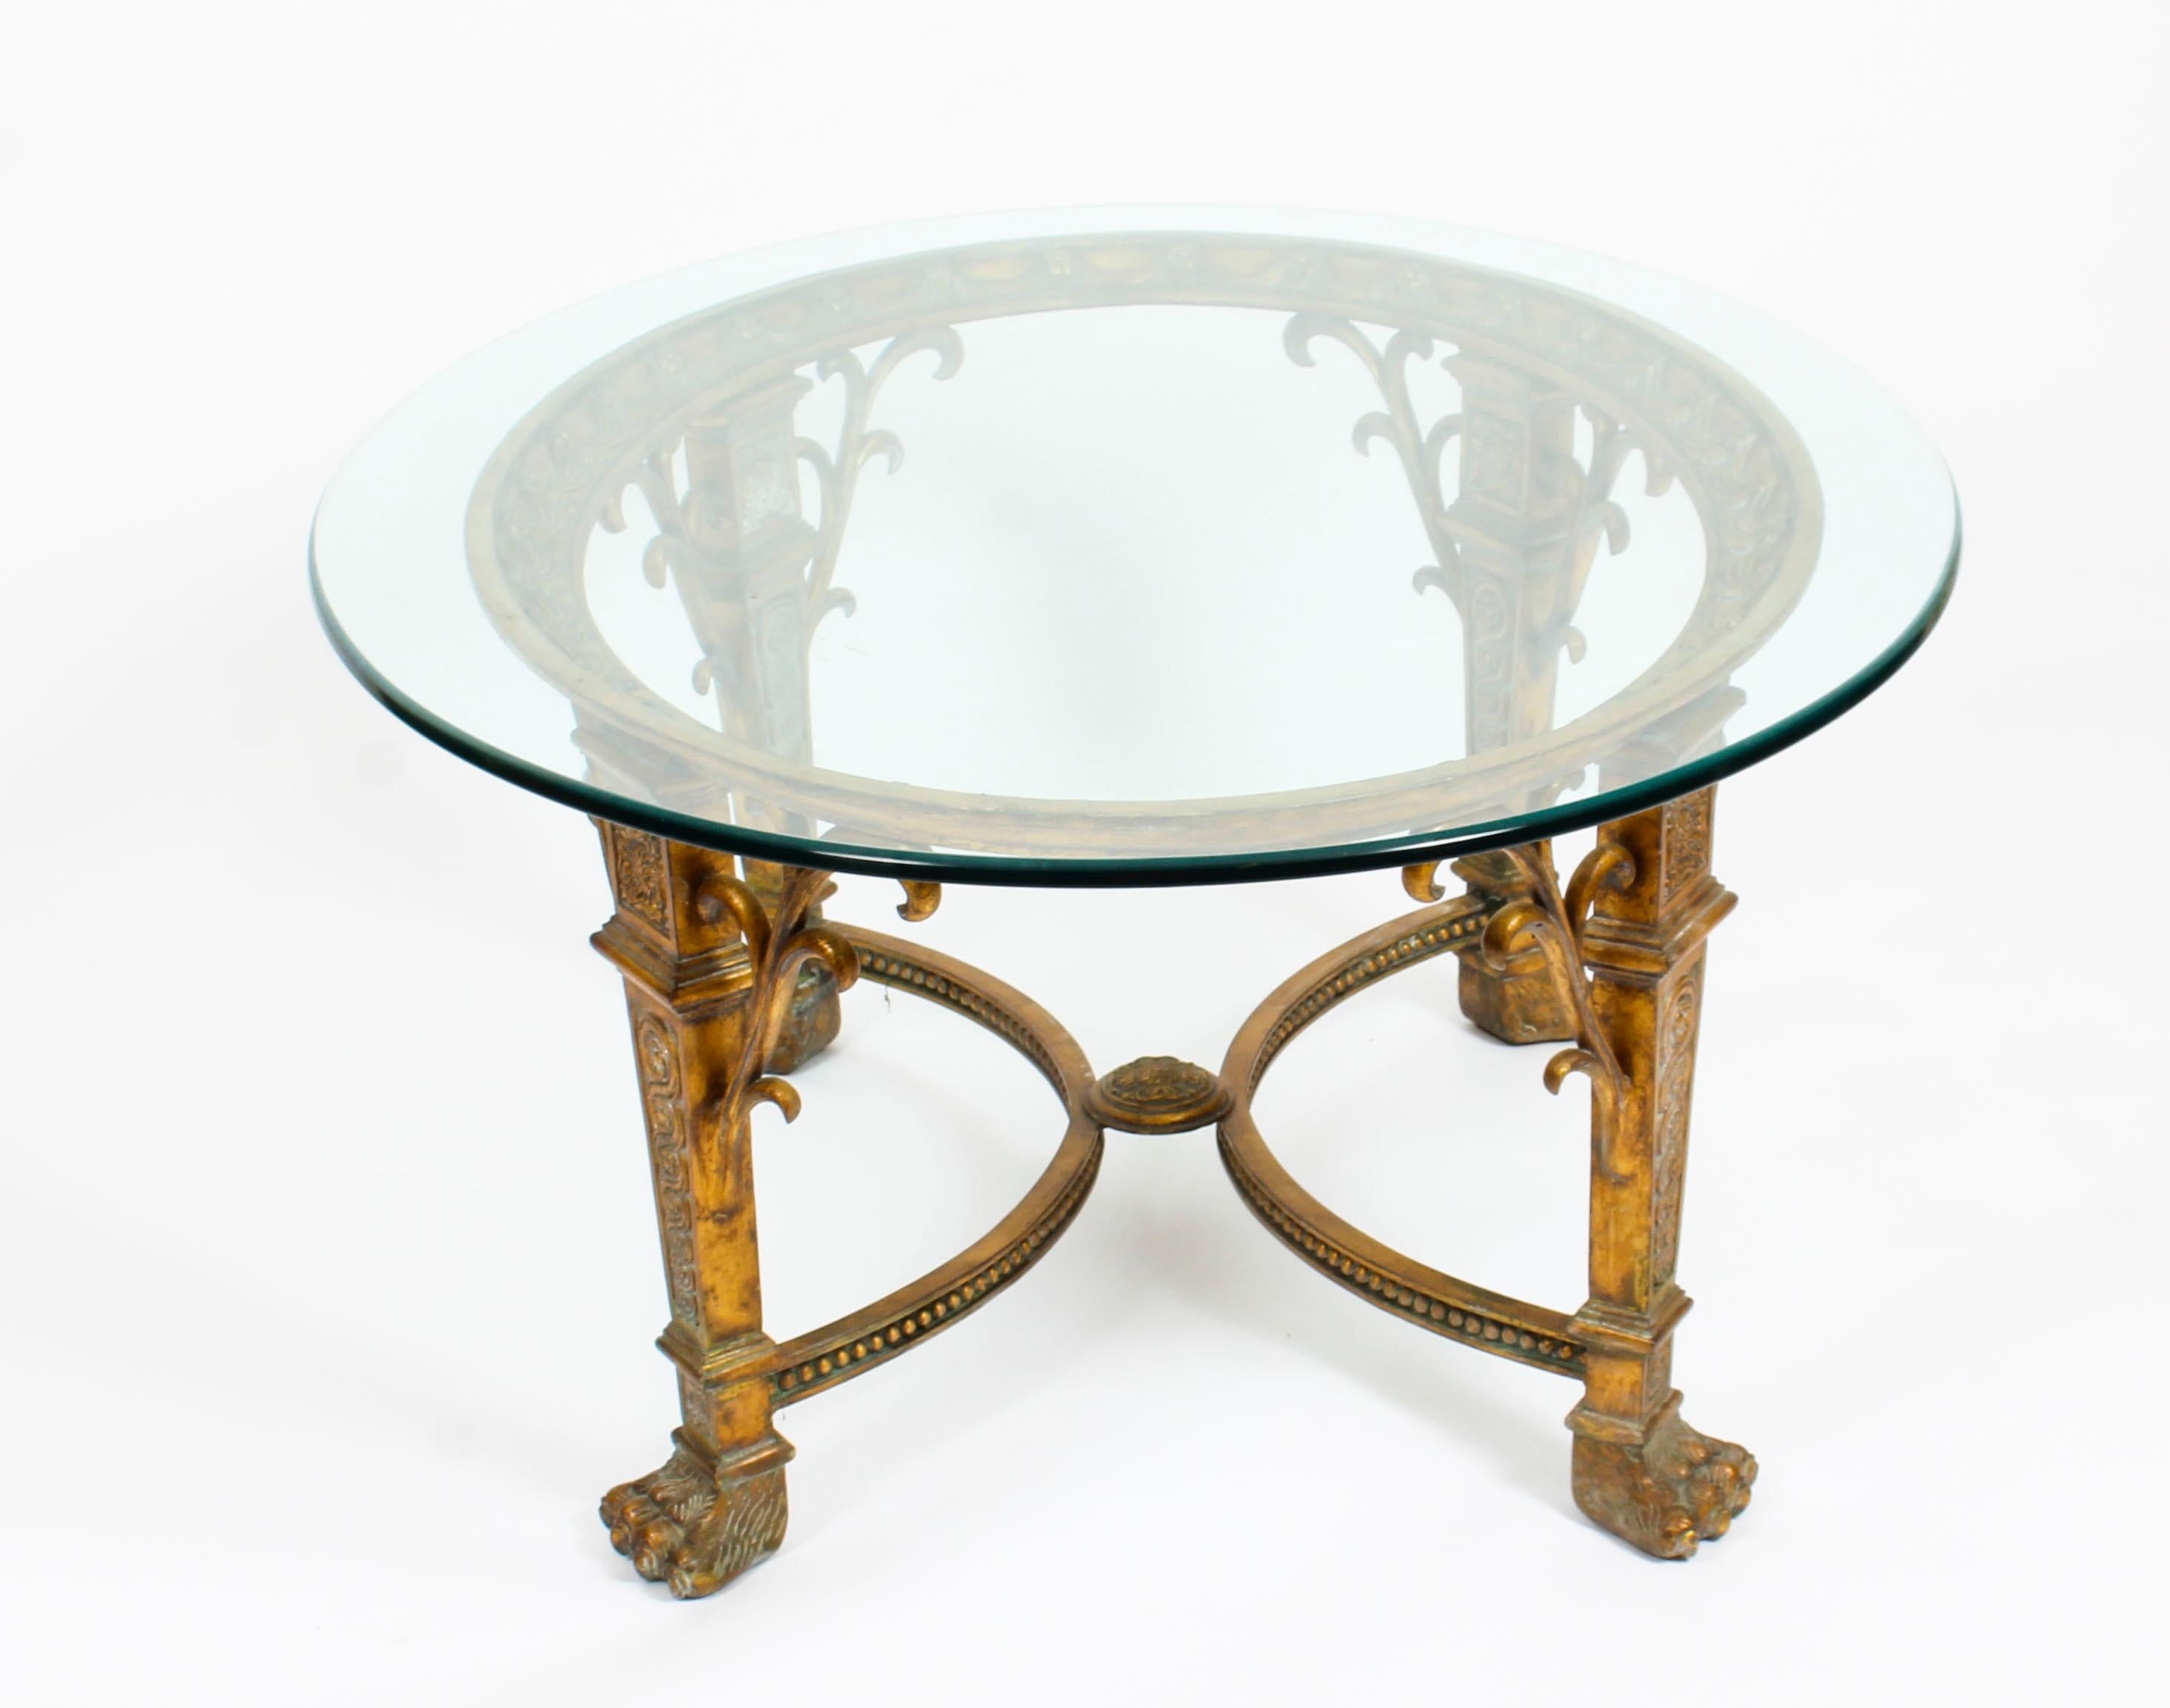 This is a truly stunning bronze framed coffee table in timeless Classical style, dating from the middle of the 20th Century.

The coffee table is of elegant oval shape and features a clear glass top. Decorated with magnificent bronze swags and